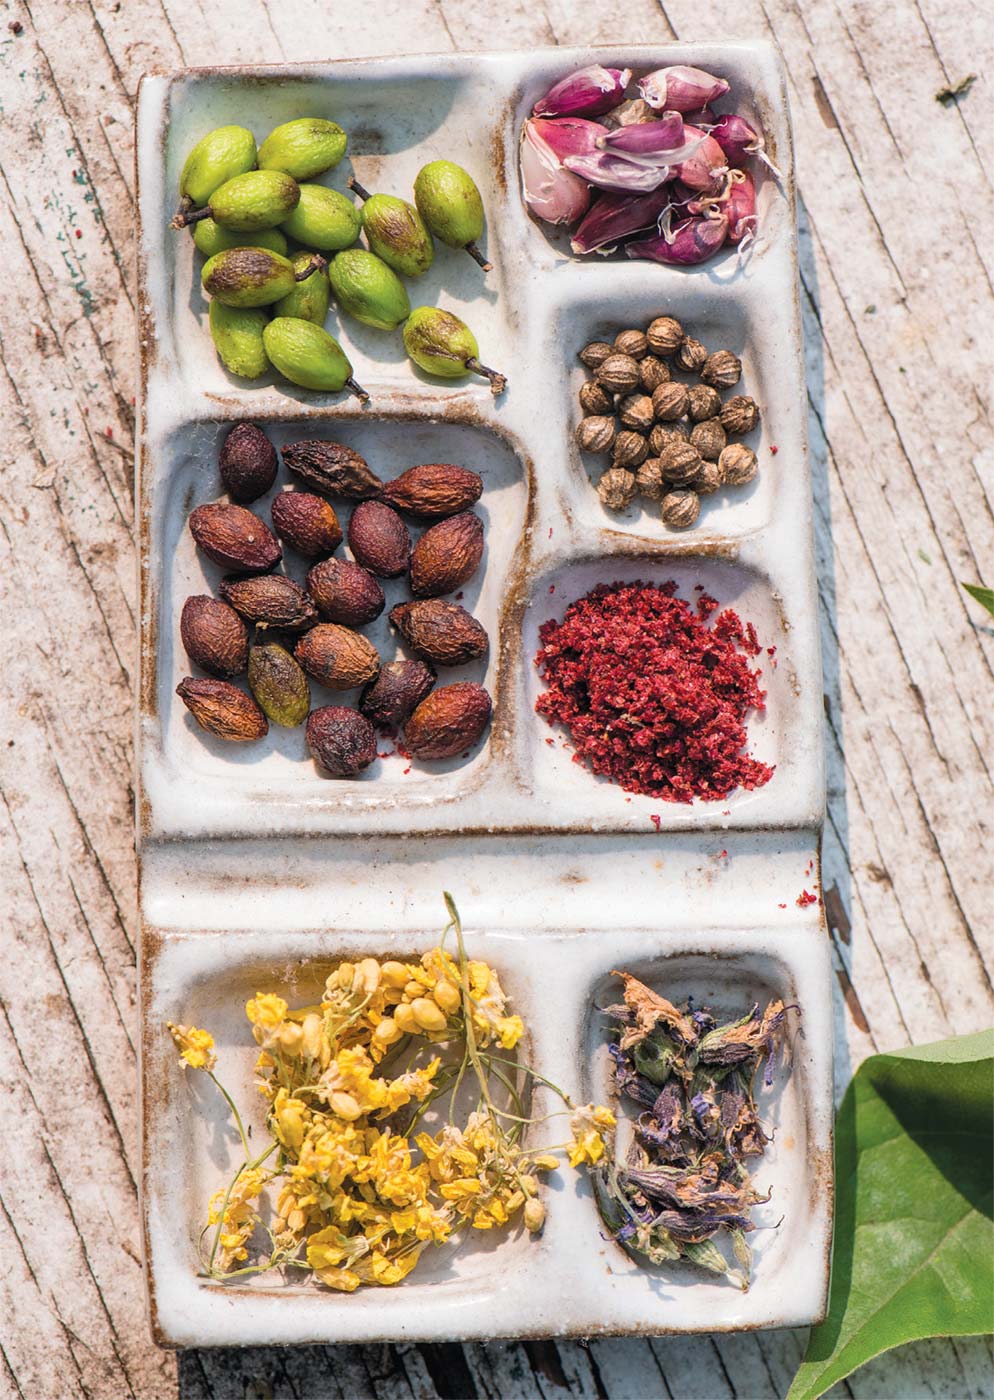 From top, left to right: Fresh spicebush berries, wild garlic seeds, dried spicebush berries, dried sumac seeds, ground sumac seeds, goldenrod, dried goldenrod